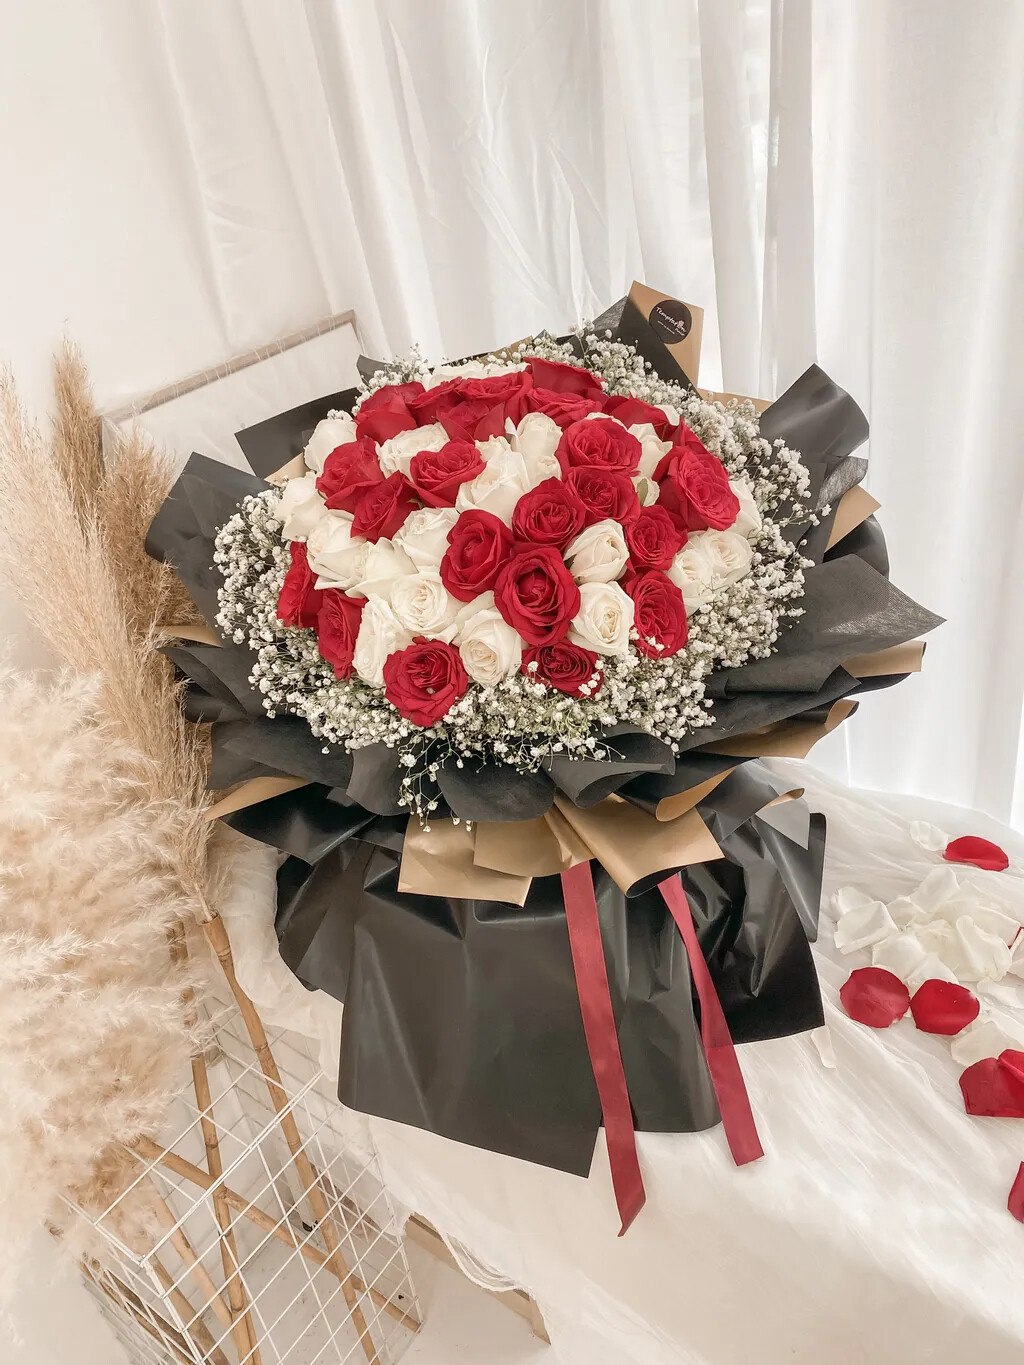 Justify My Love (By: Temptation Florist from Seremban)